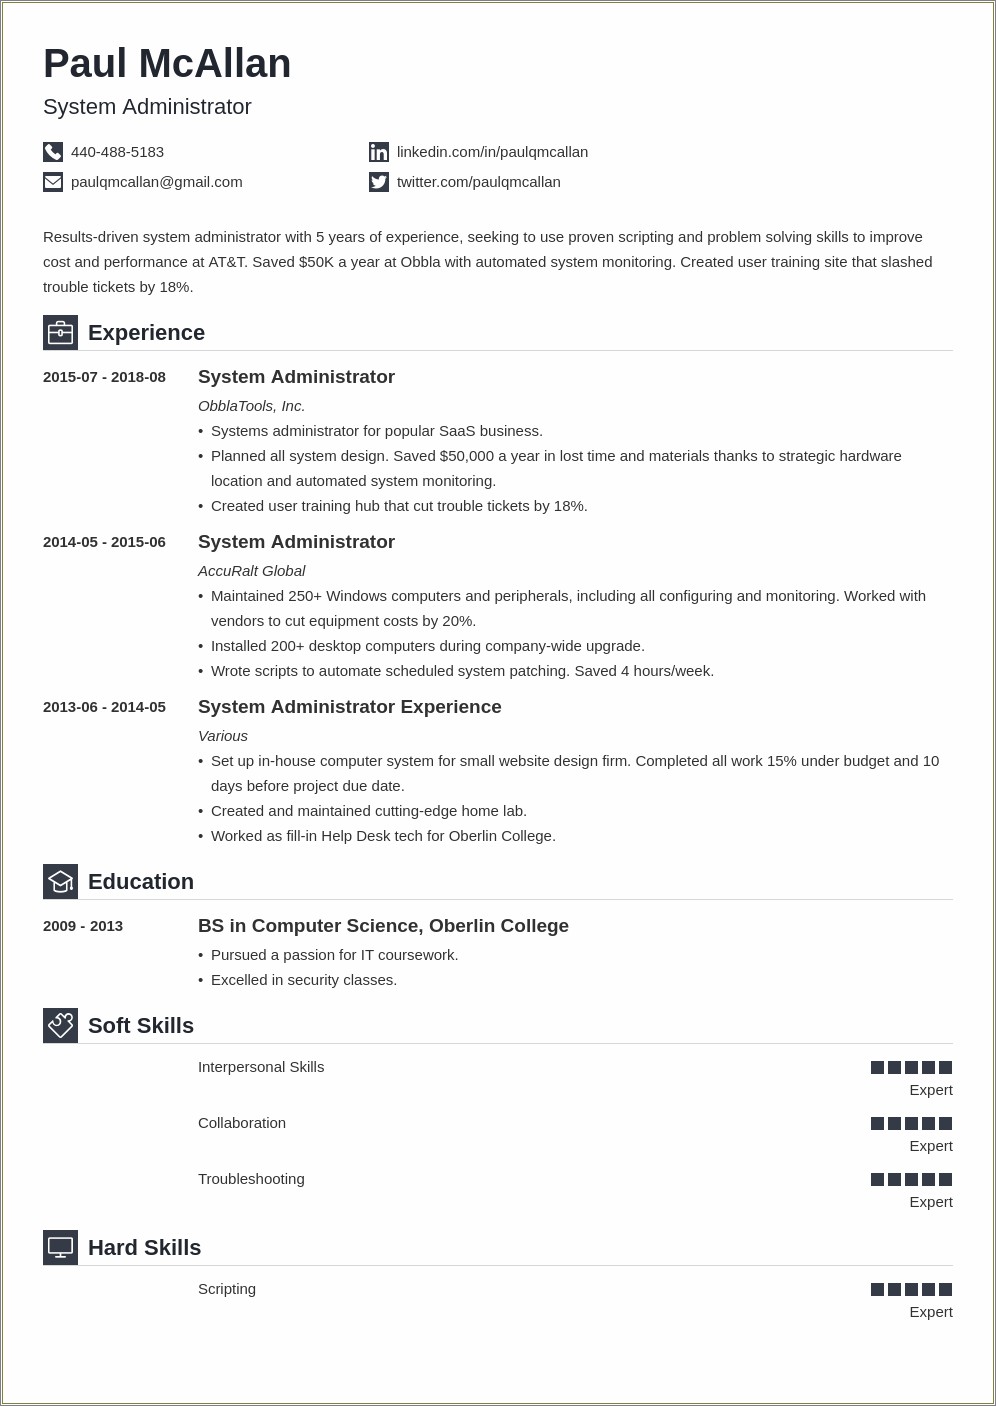 Lunix Admin 3 Years Experience Resume Indeed.com